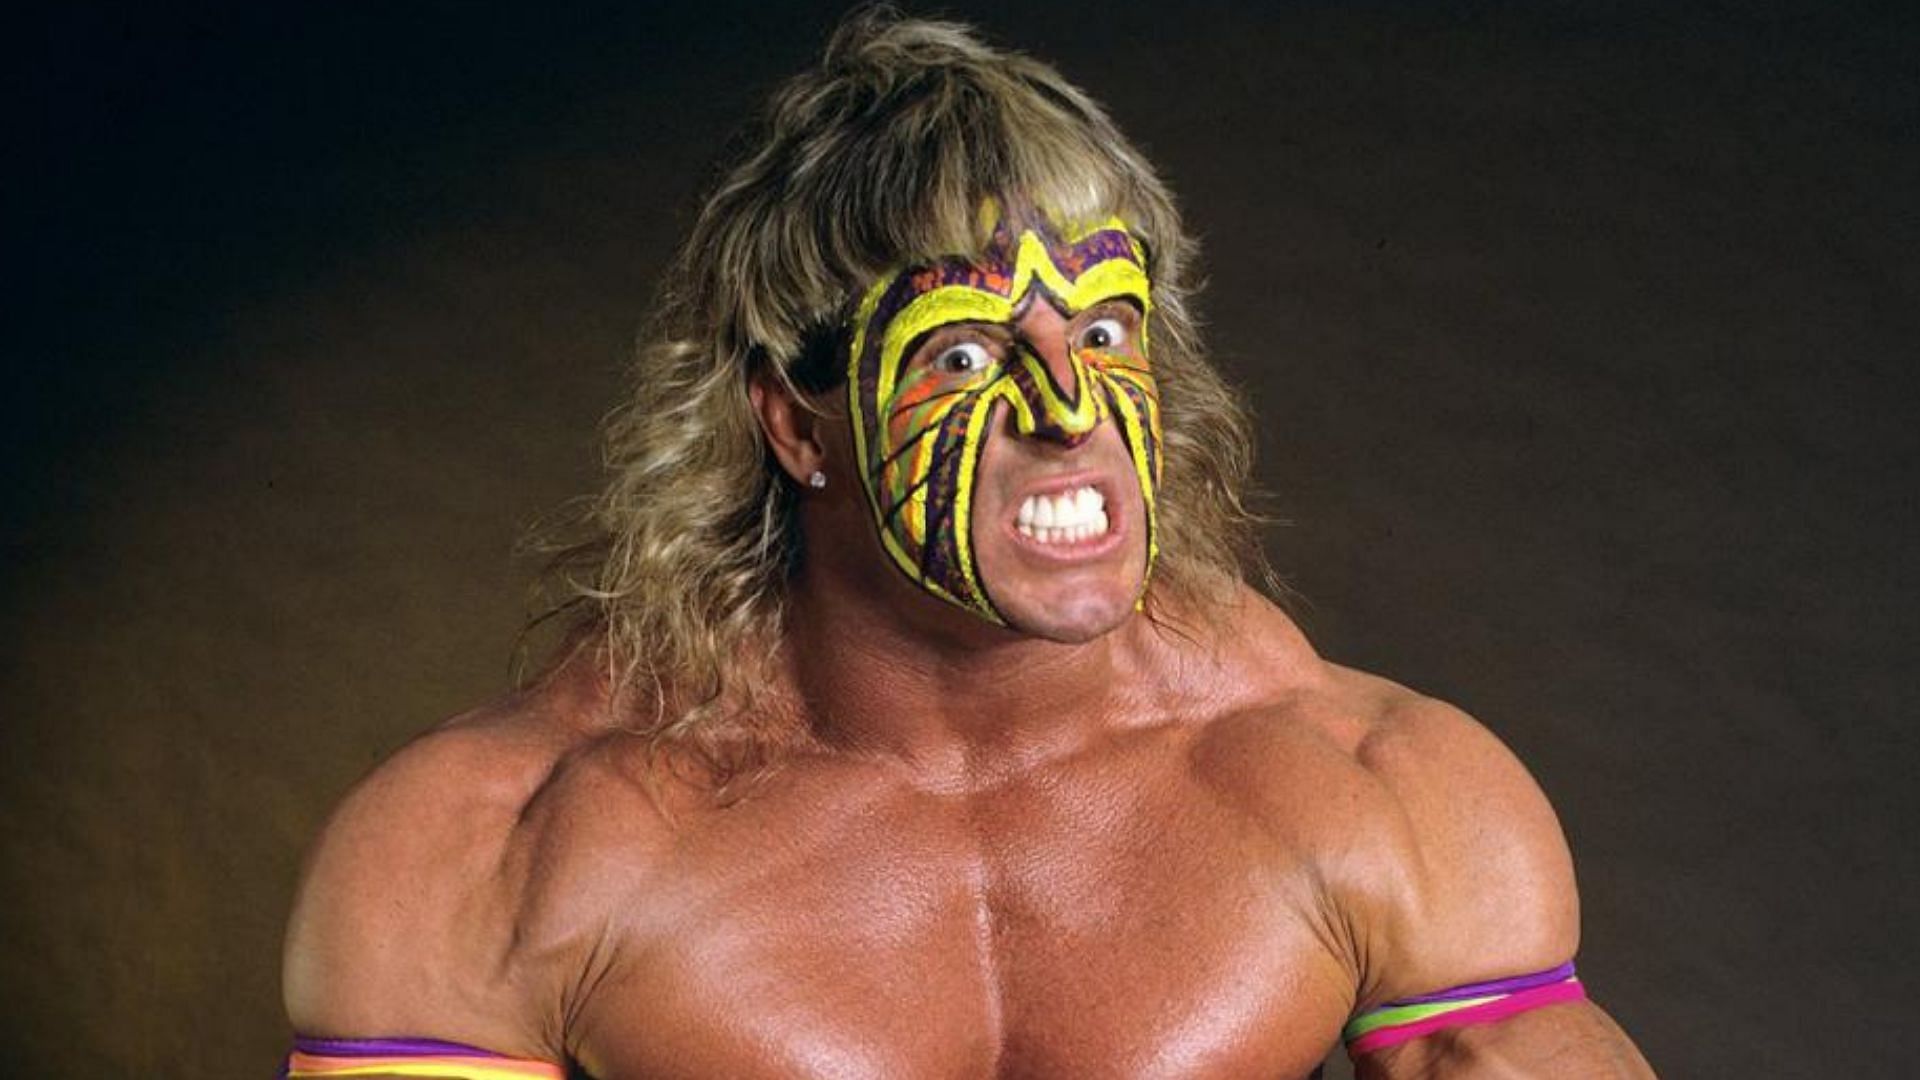 The Ultimate Warrior passed away in 2014, three days after his Hall of Fame induction